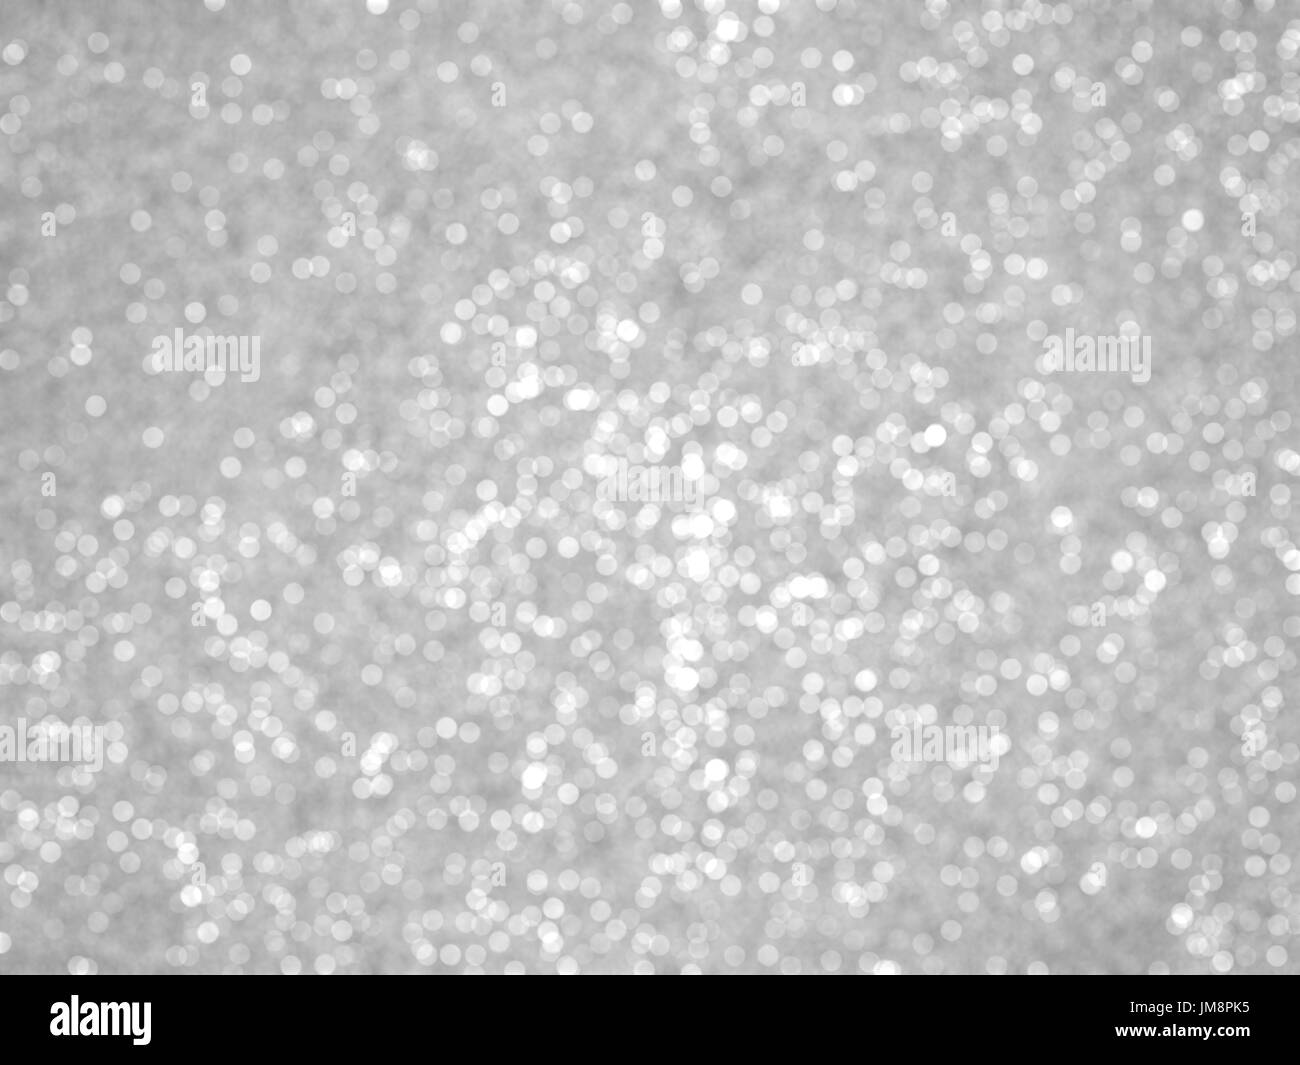 Glitter Black and White Stock Photos & Images - Alamy